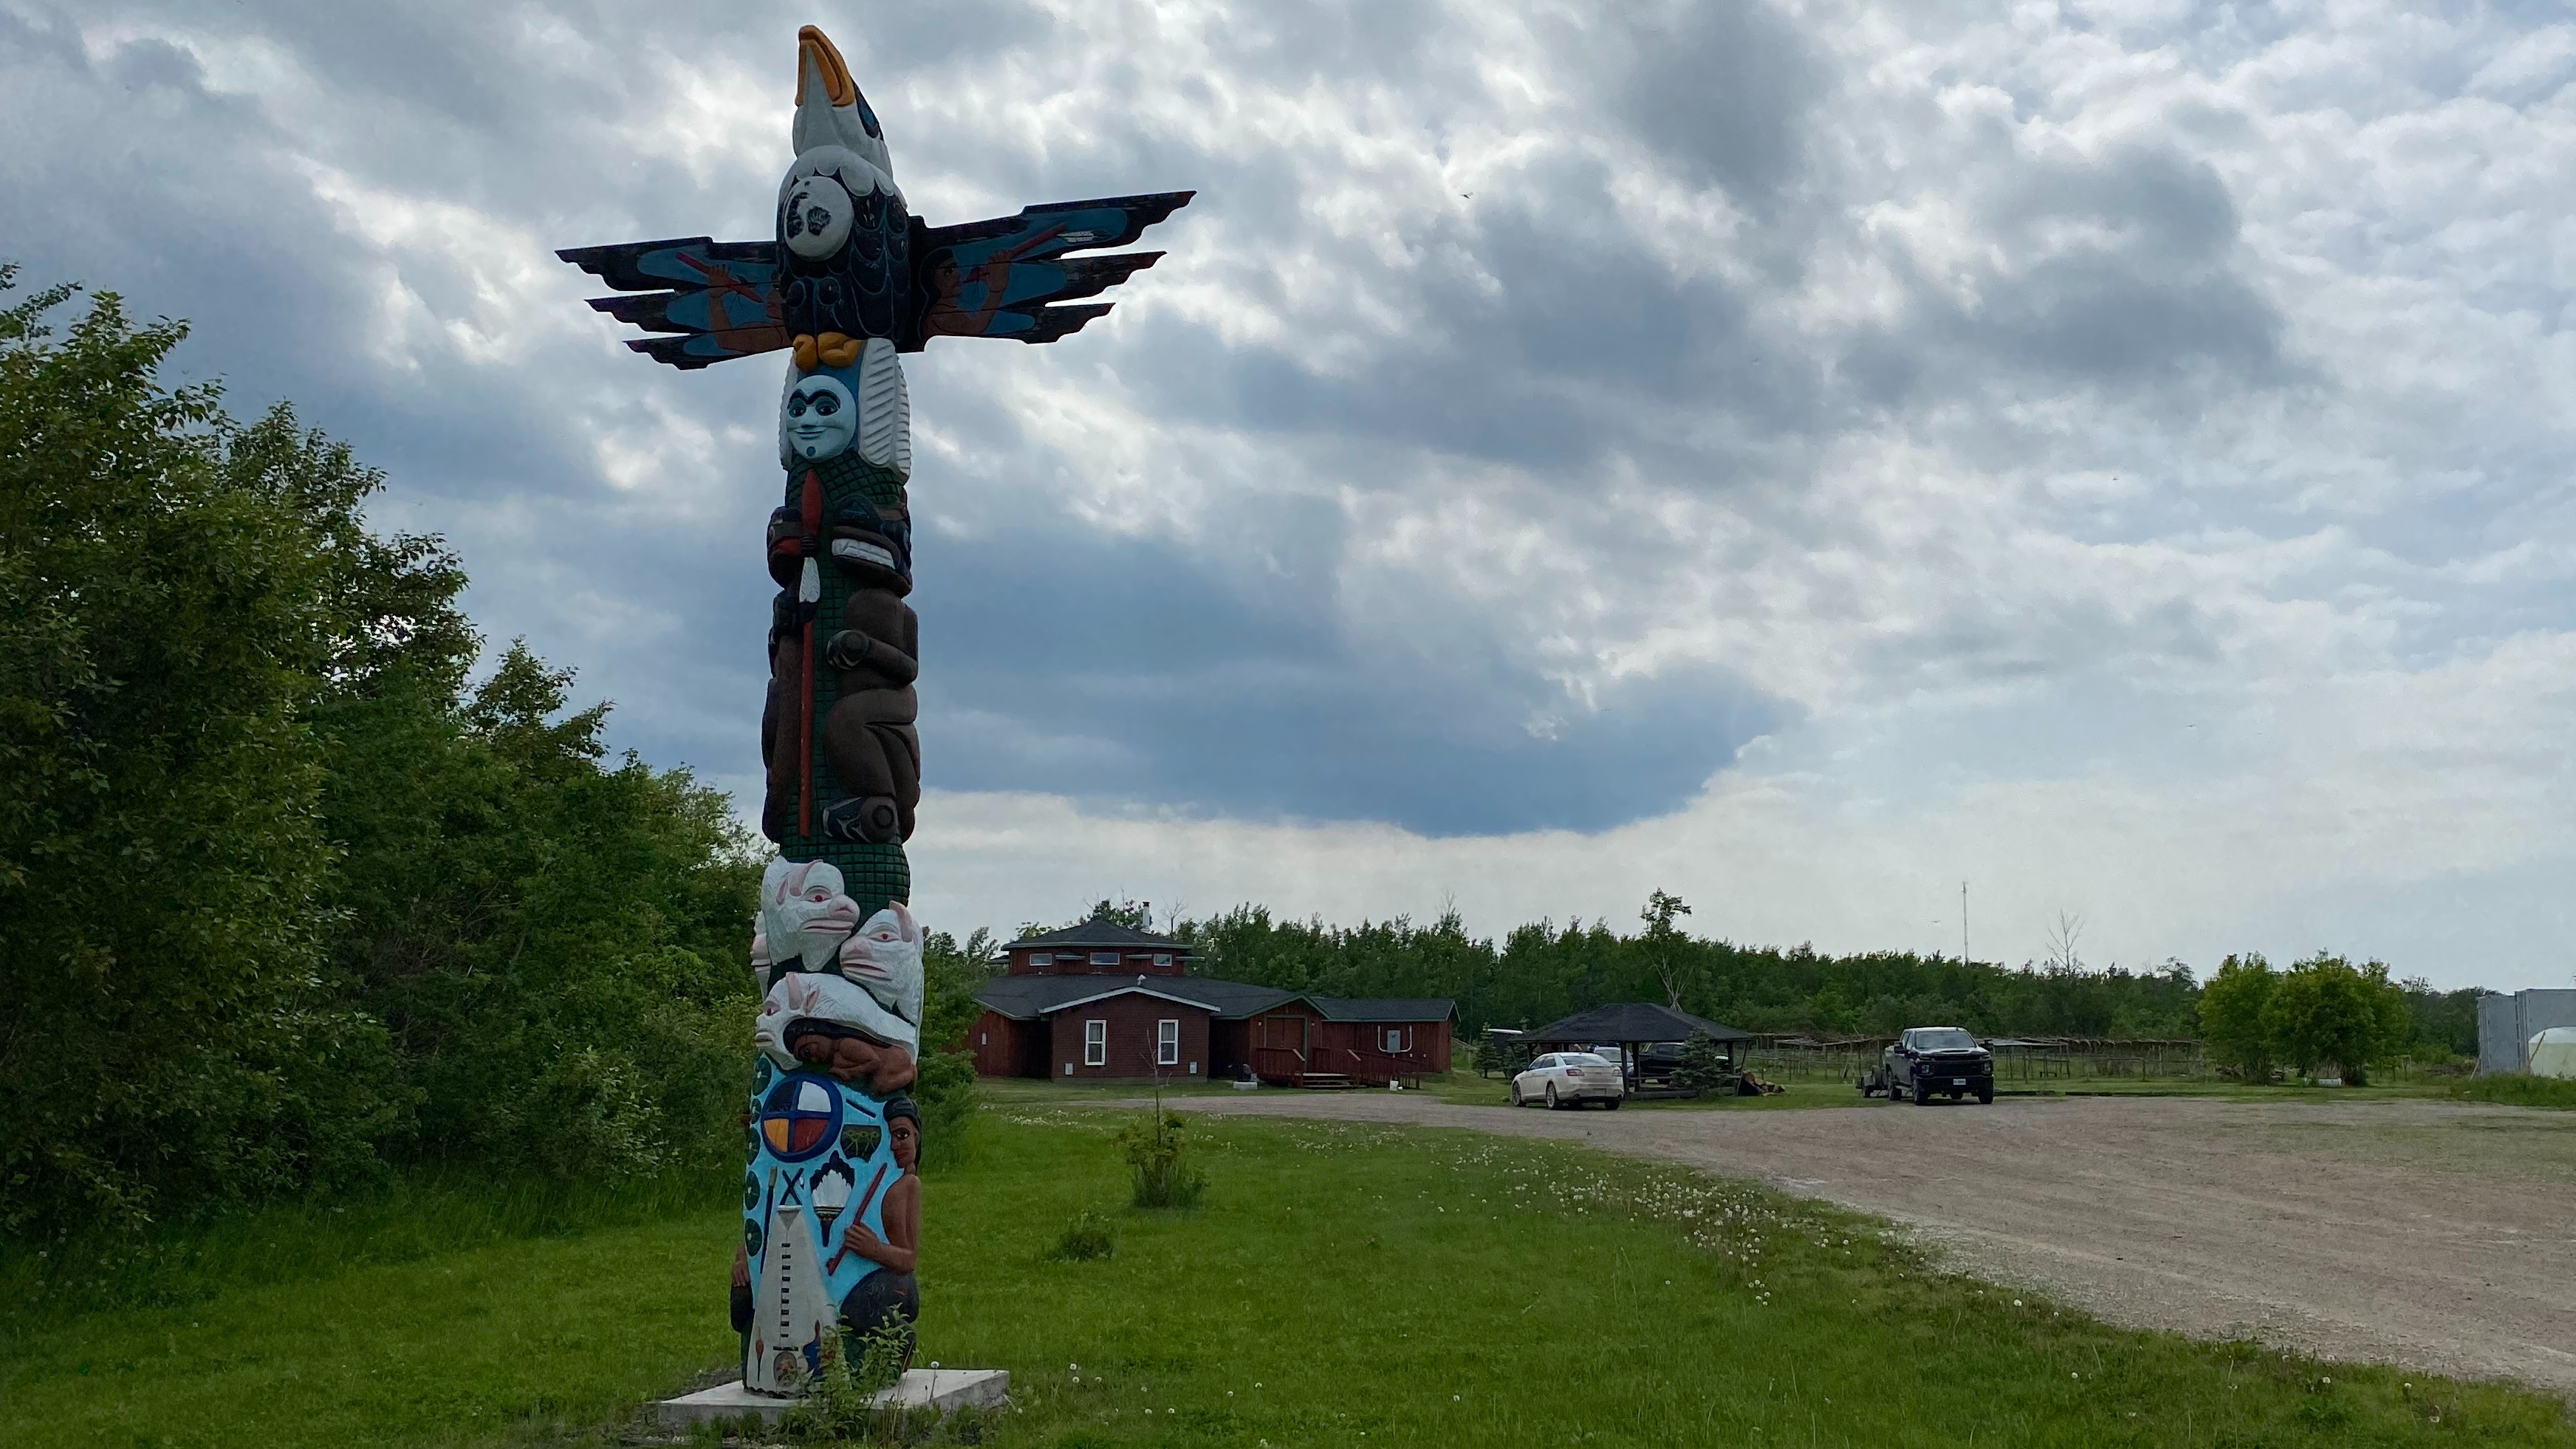 totem pole in the foreground of a picture with cloudy sky in behind. far in the back is a lodge and cars, with a road leading to it. trees surround the scene